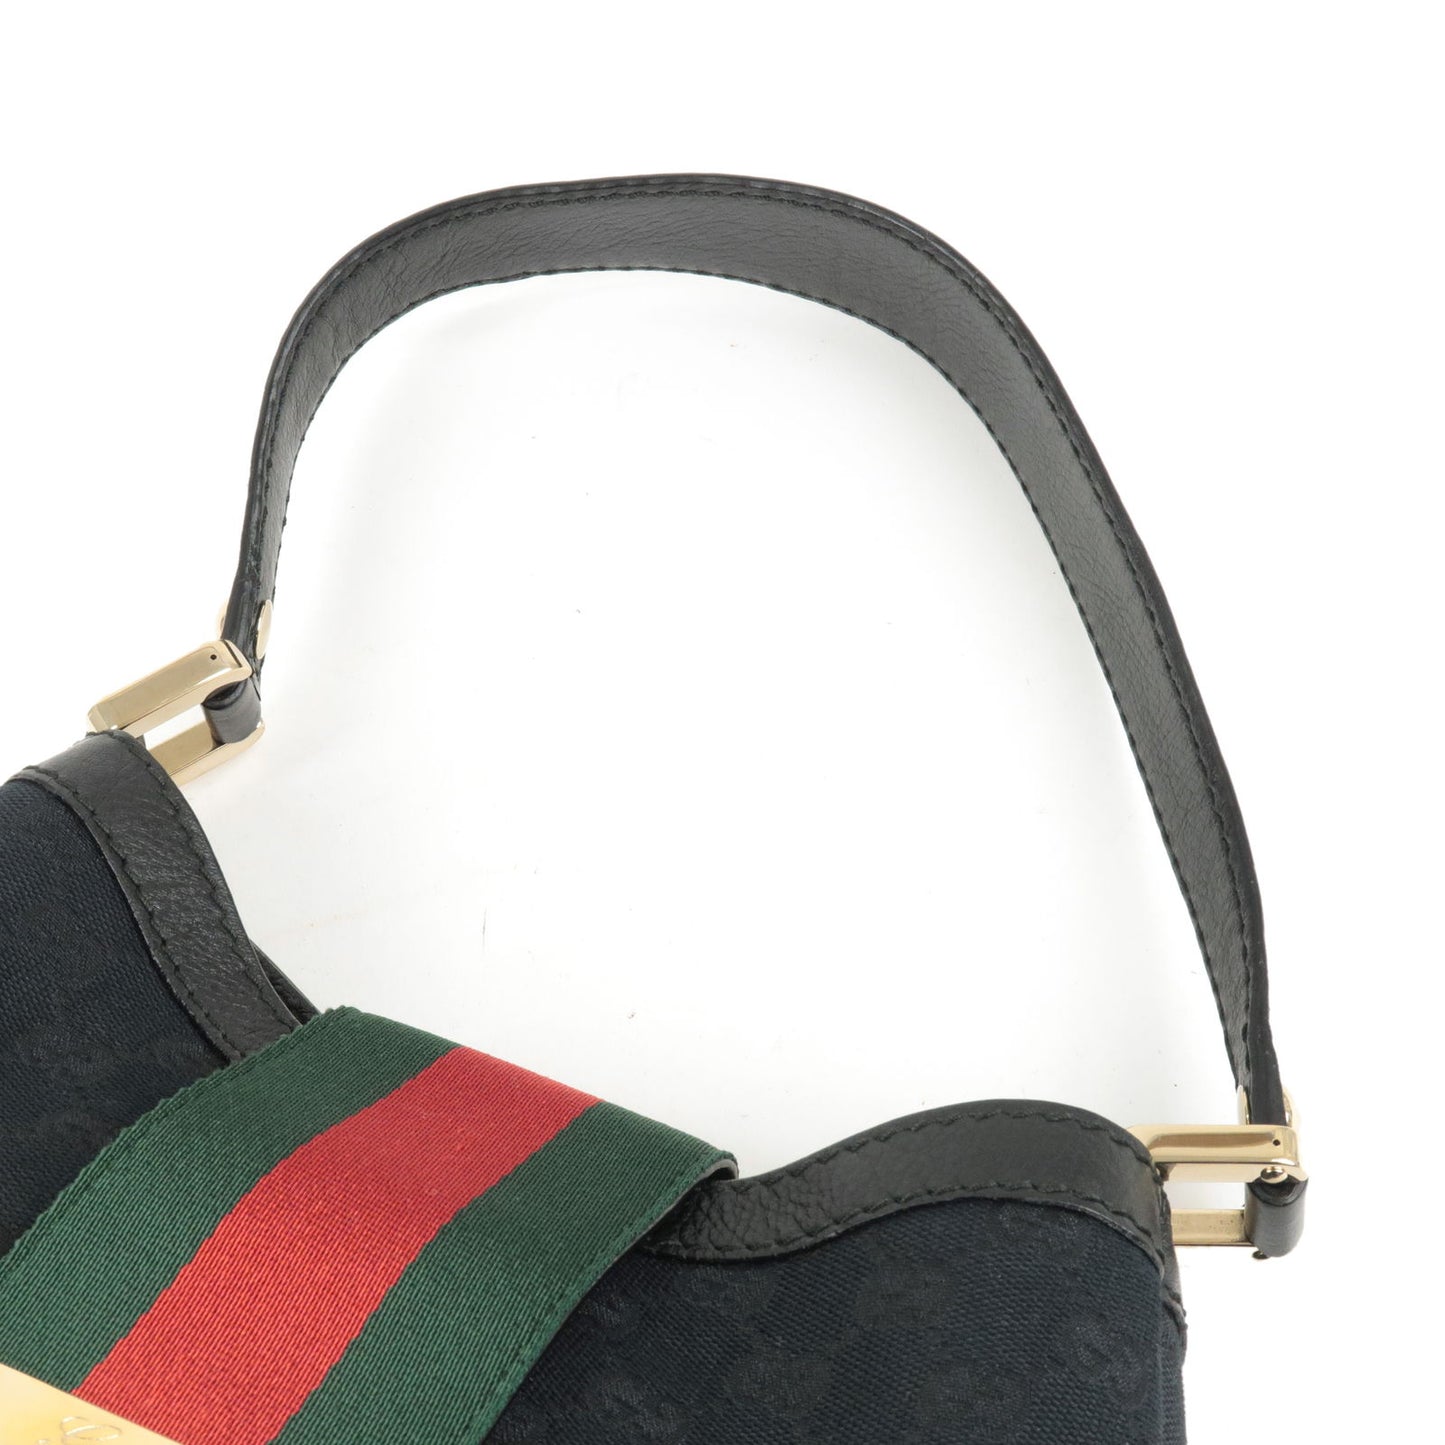 GUCCI-Sherry-Line-GG-Canvas-Leather-Shoulder-Bag-Black-233608 –  dct-ep_vintage luxury Store